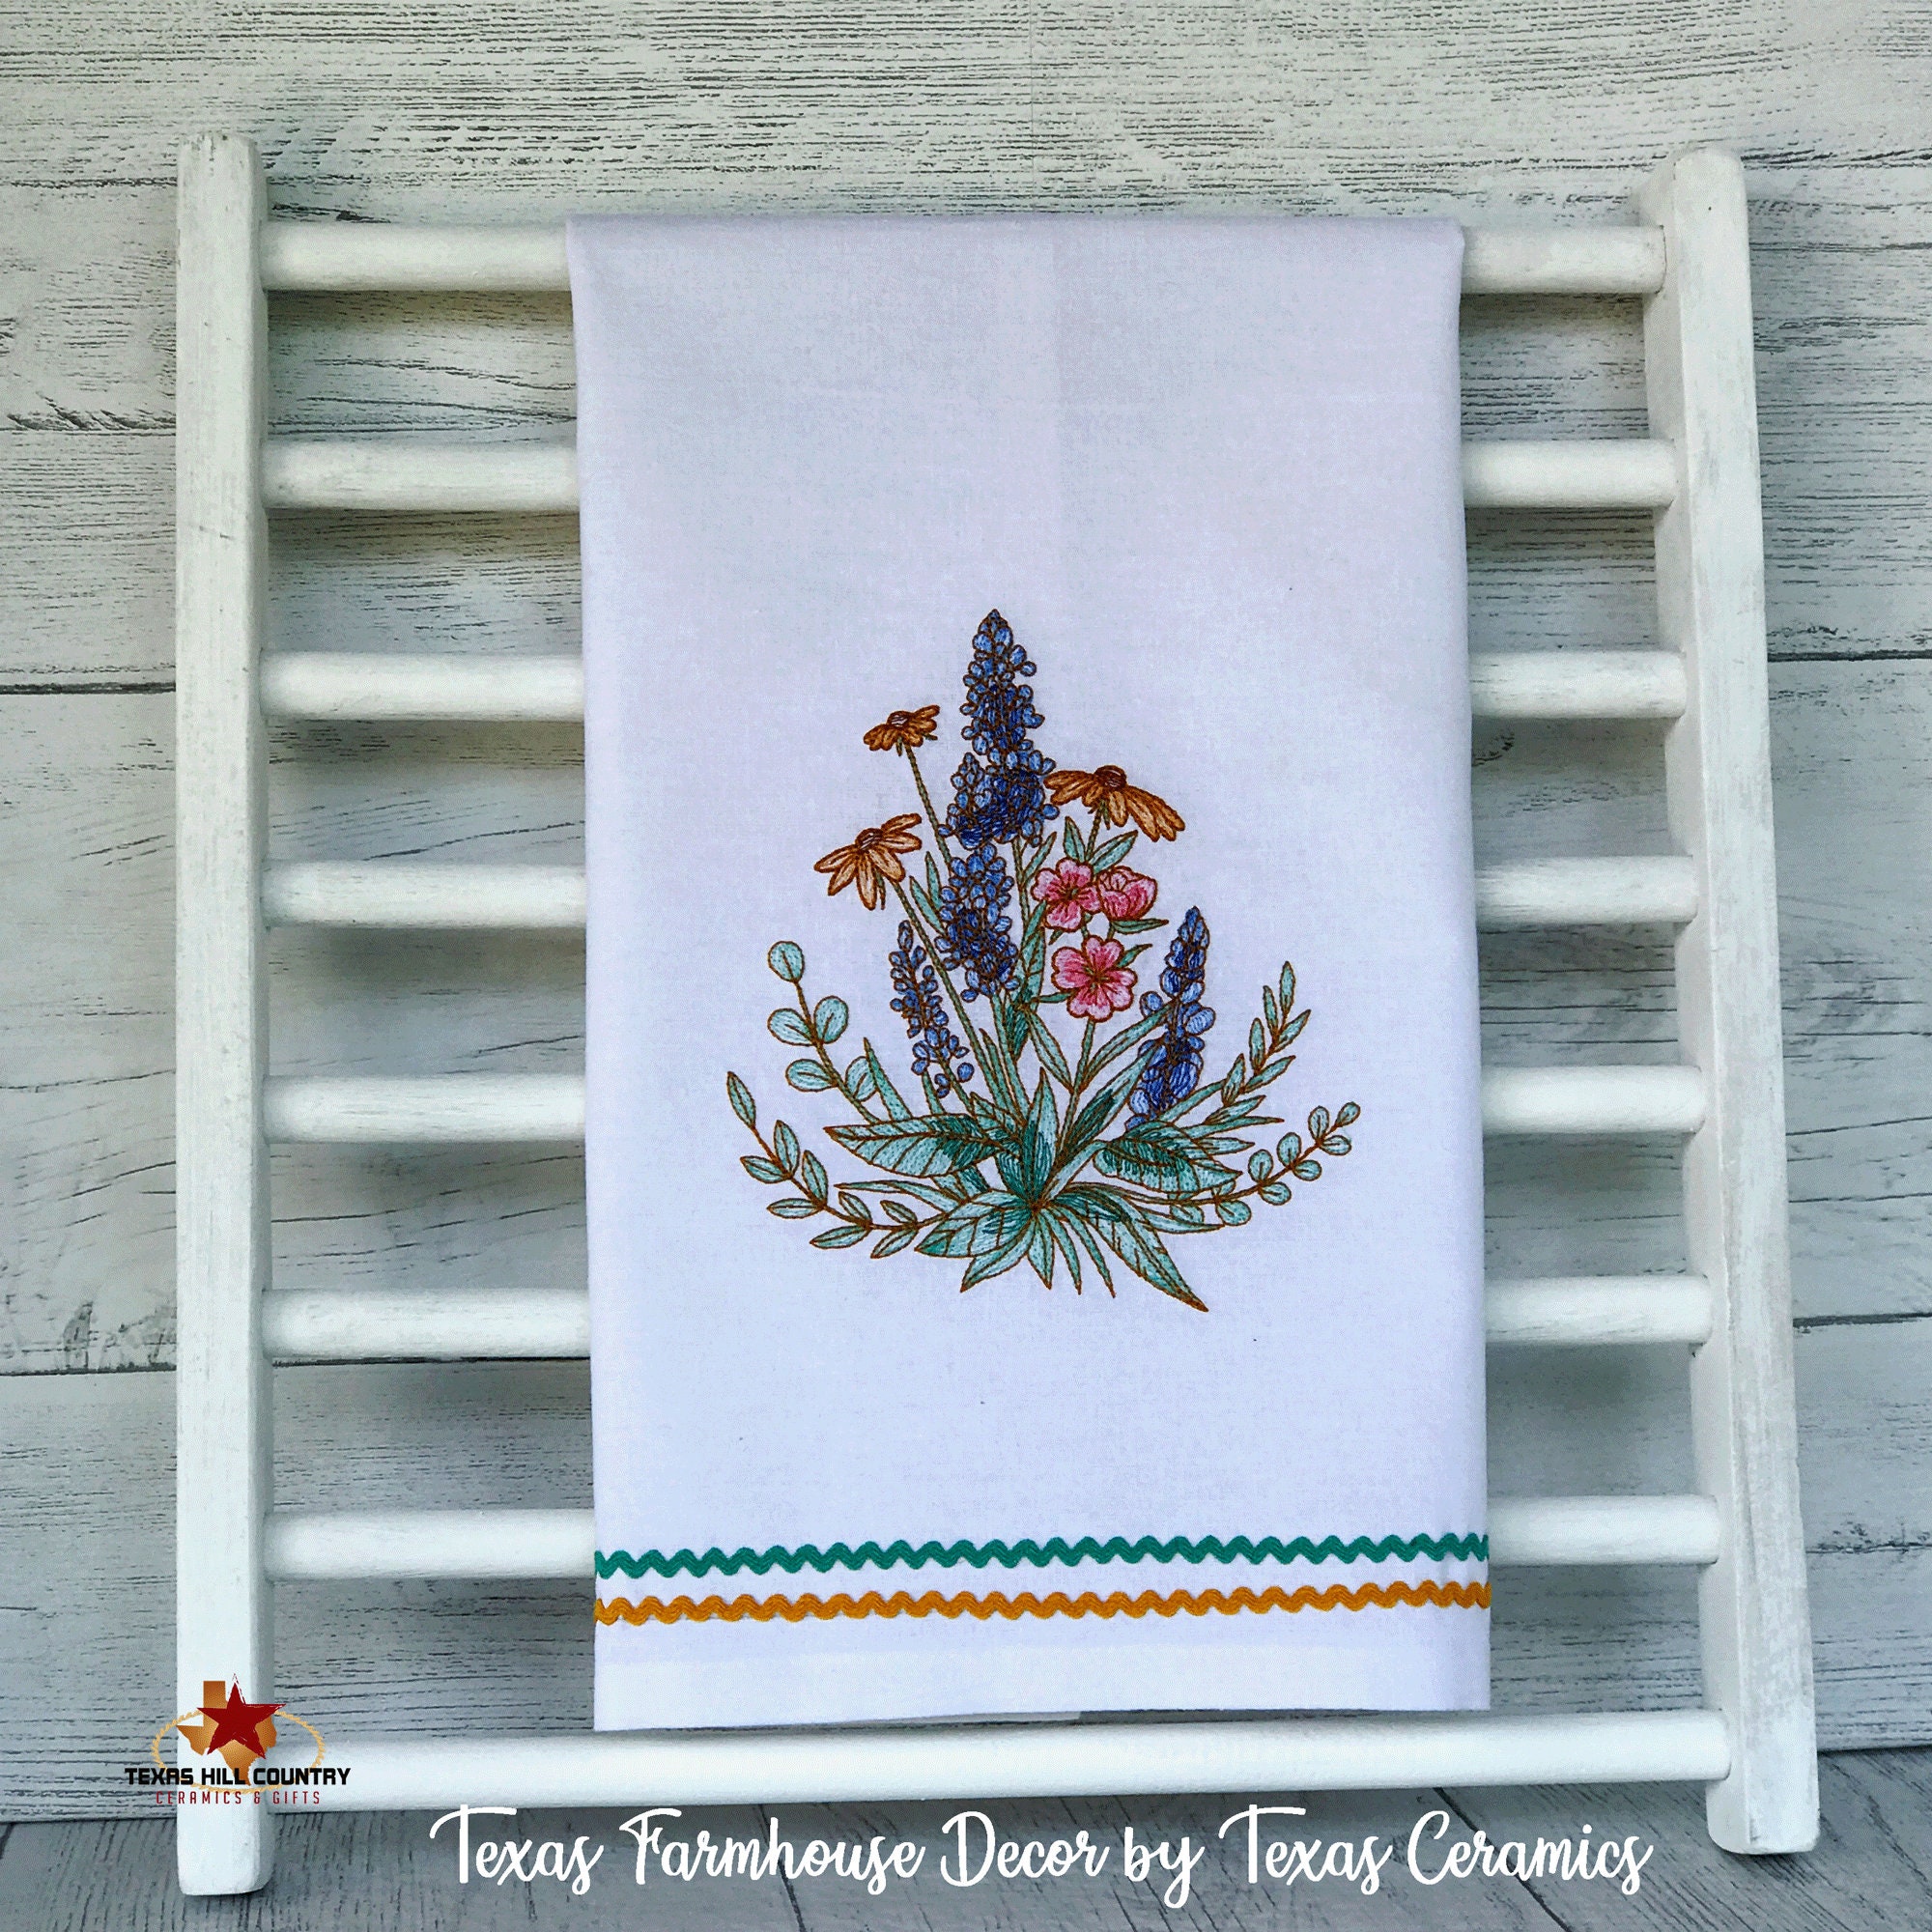 Texas Bluebonnet Wildflower Cotton Kitchen Towel made in the Texas Hill  Country, Embroidered Texas Bluebonnet Wildflowers with Blue Stripe Accent  Towel 100% Cotton - Texas Hill Country Ceramics